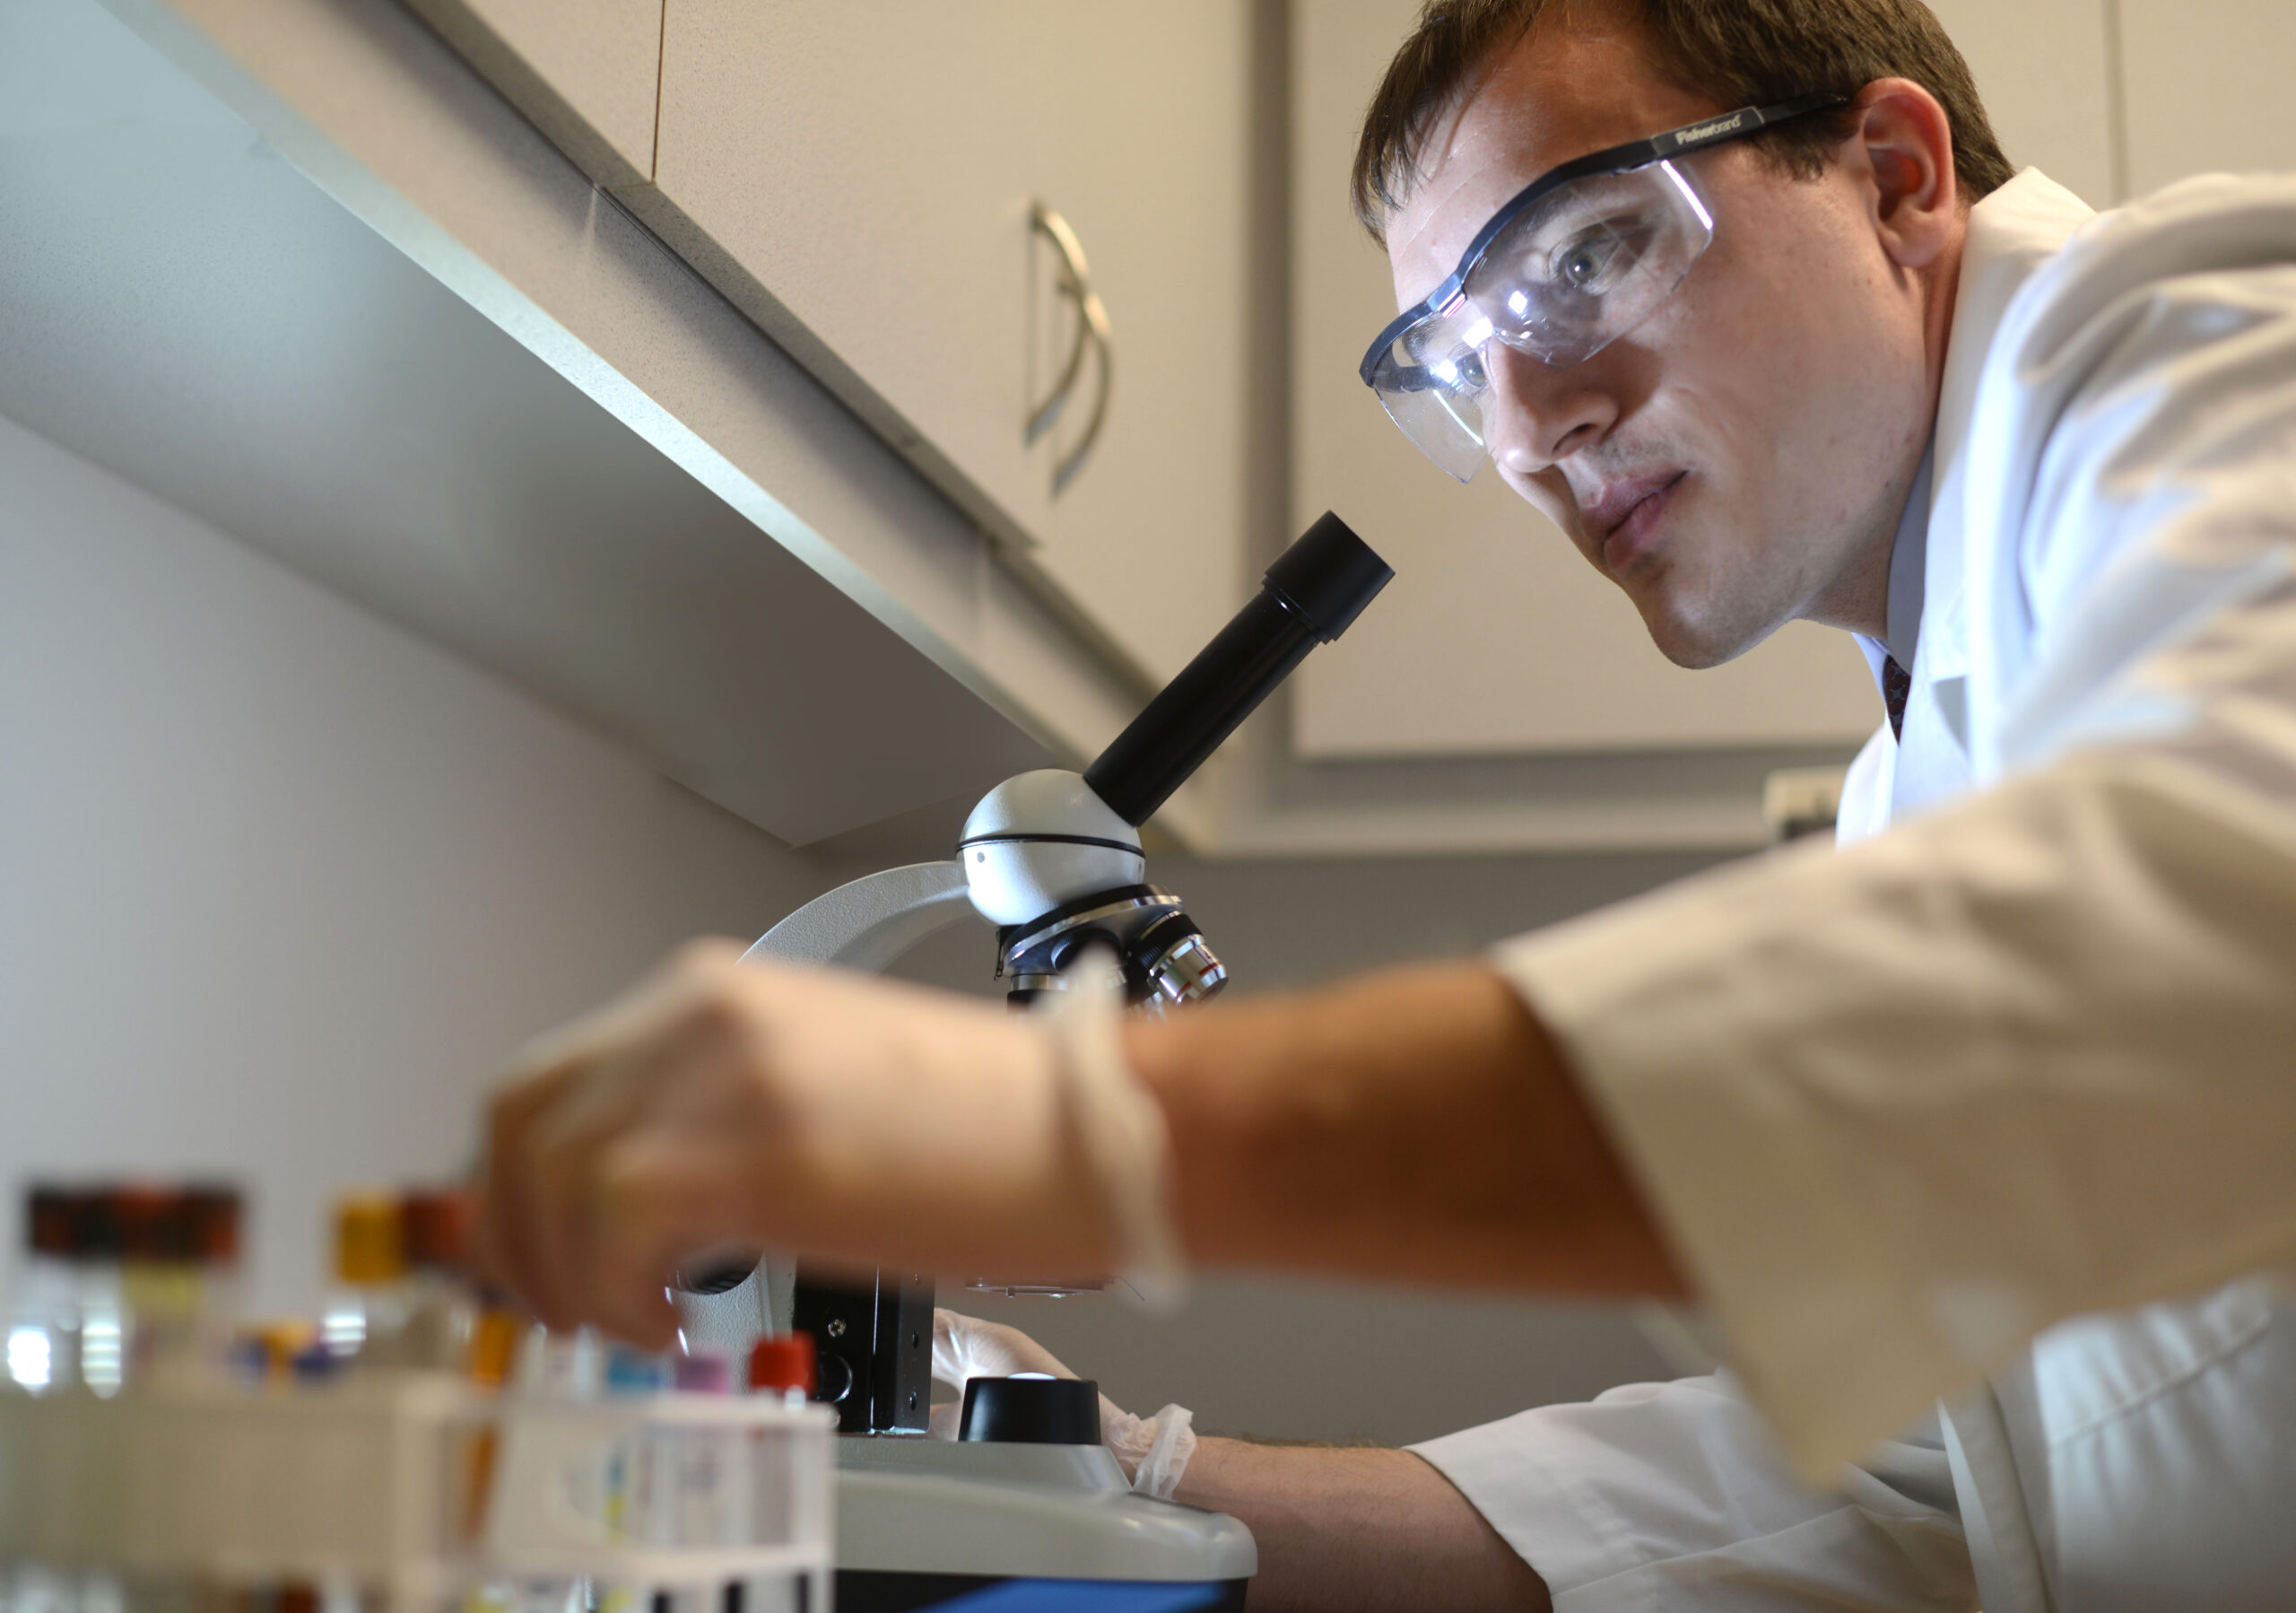 person wearing lab coat and safety glasses, holding test tubes and looking at microscope